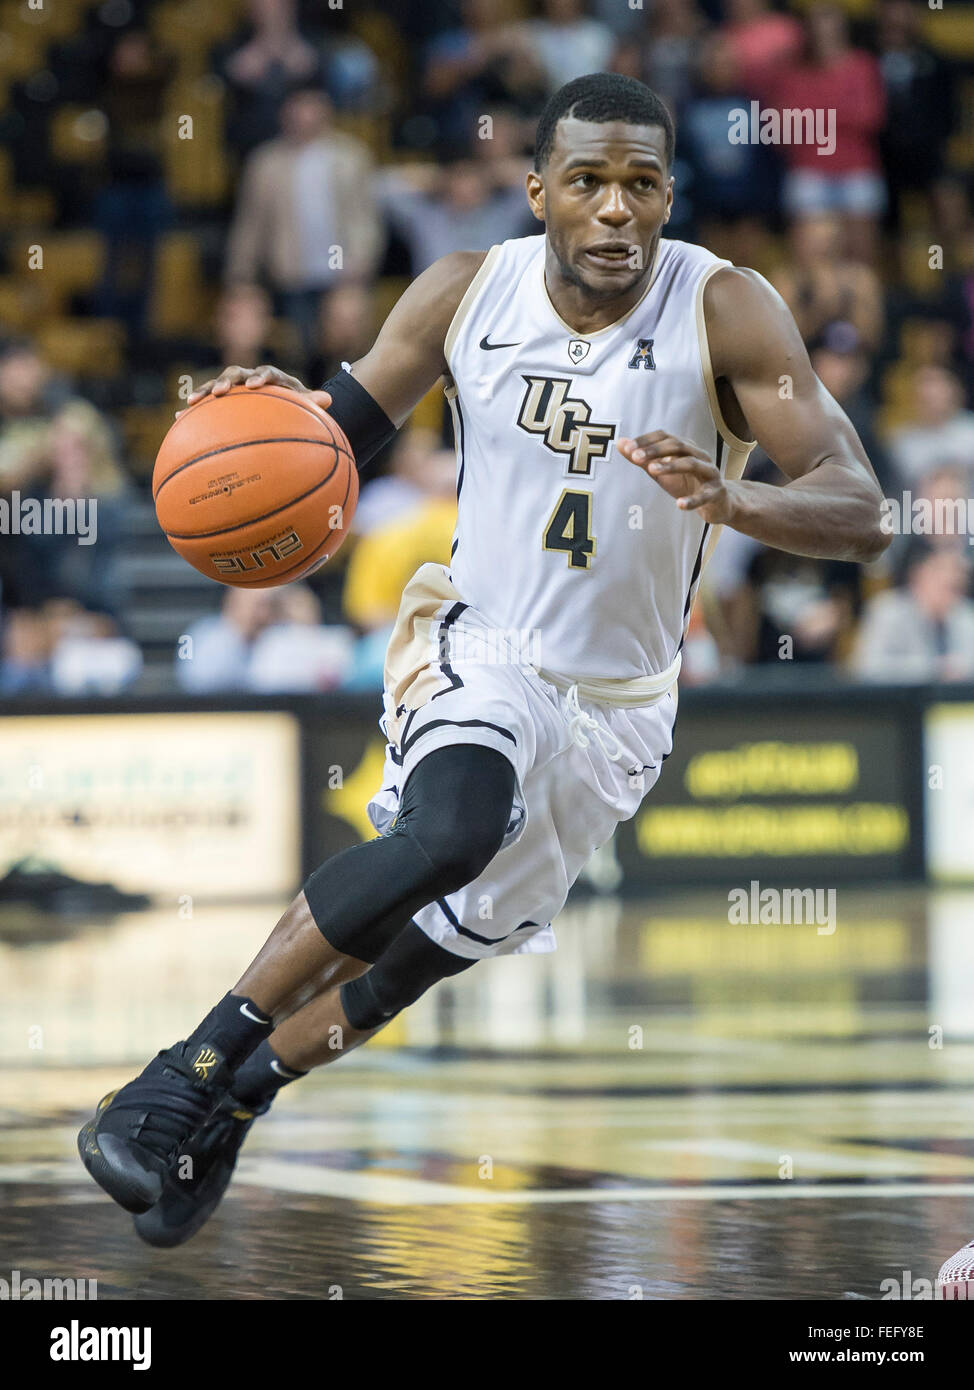 Orlando, FL, USA. 6th Feb, 2016. UCF guard Daiquan Walker (4) drives to the basket during 2nd half mens NCAA basketball game action between the Temple Owls and the UCF Knights. Temple defeated UCF 62-60 at CFE Arena in Orlando, Fl. Romeo T Guzman/CSM/Alamy Live News Stock Photo